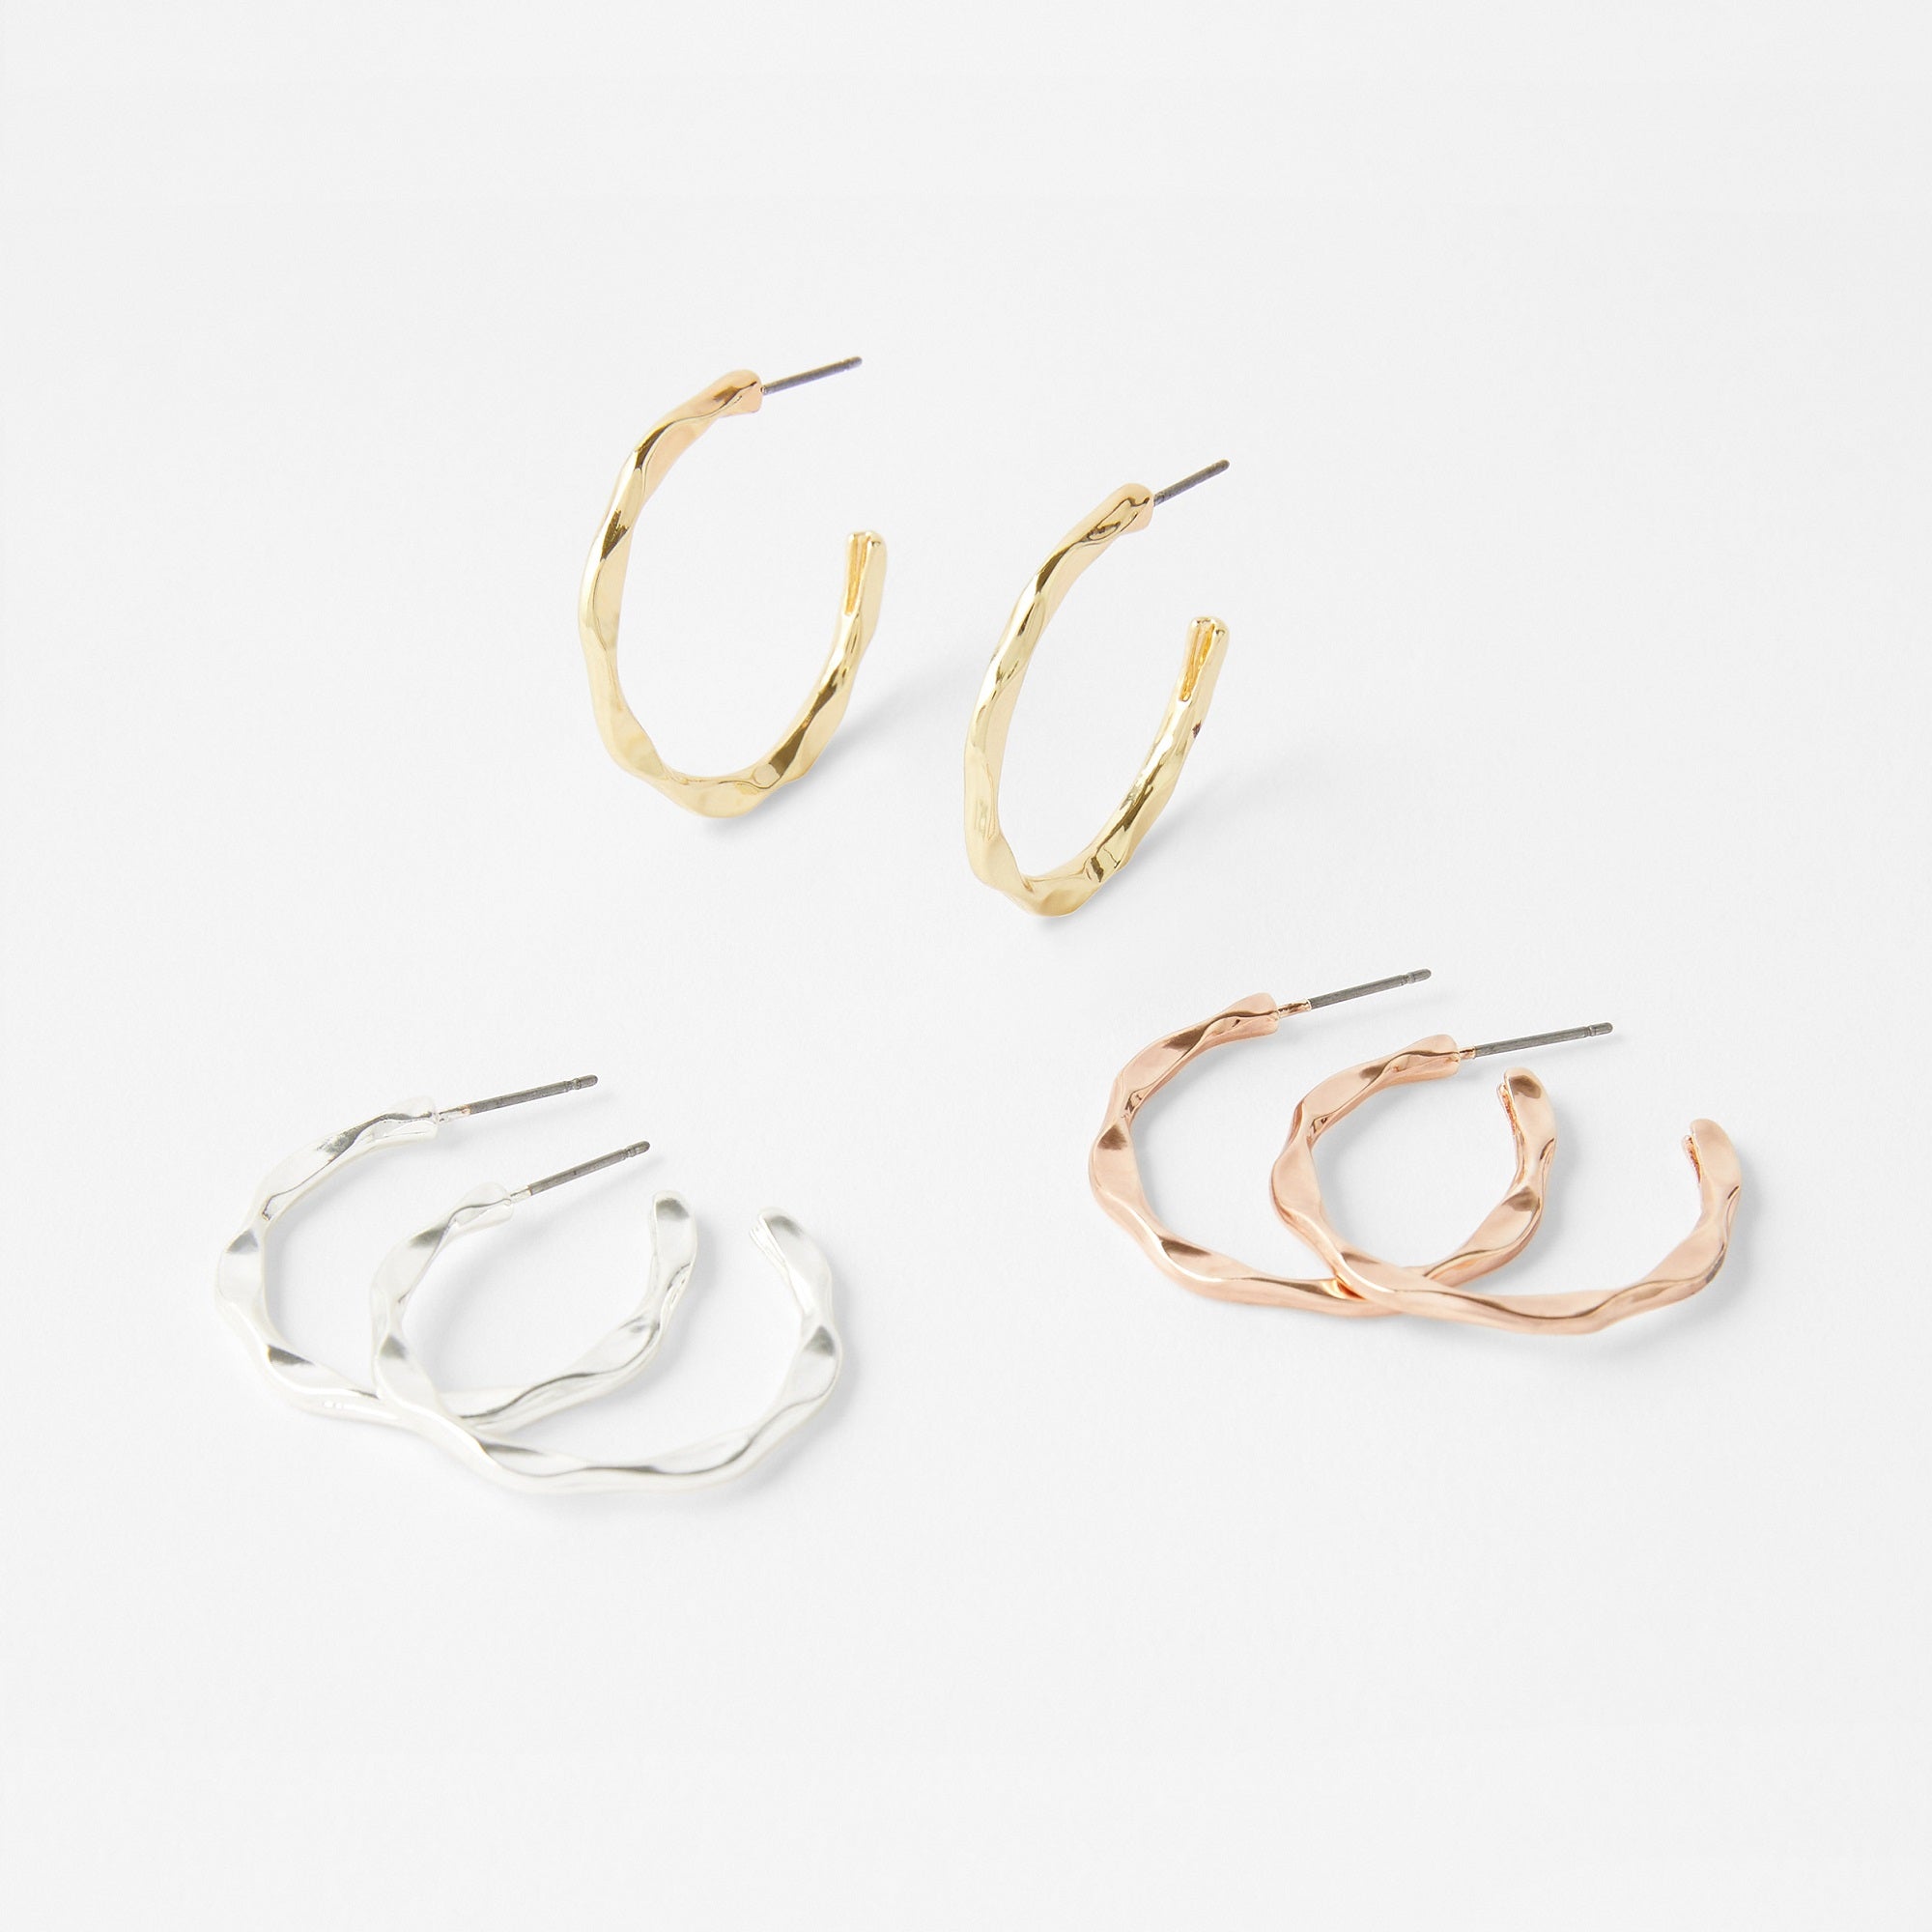 Accessorize London 3 X Mixed Metal Hoop Pack